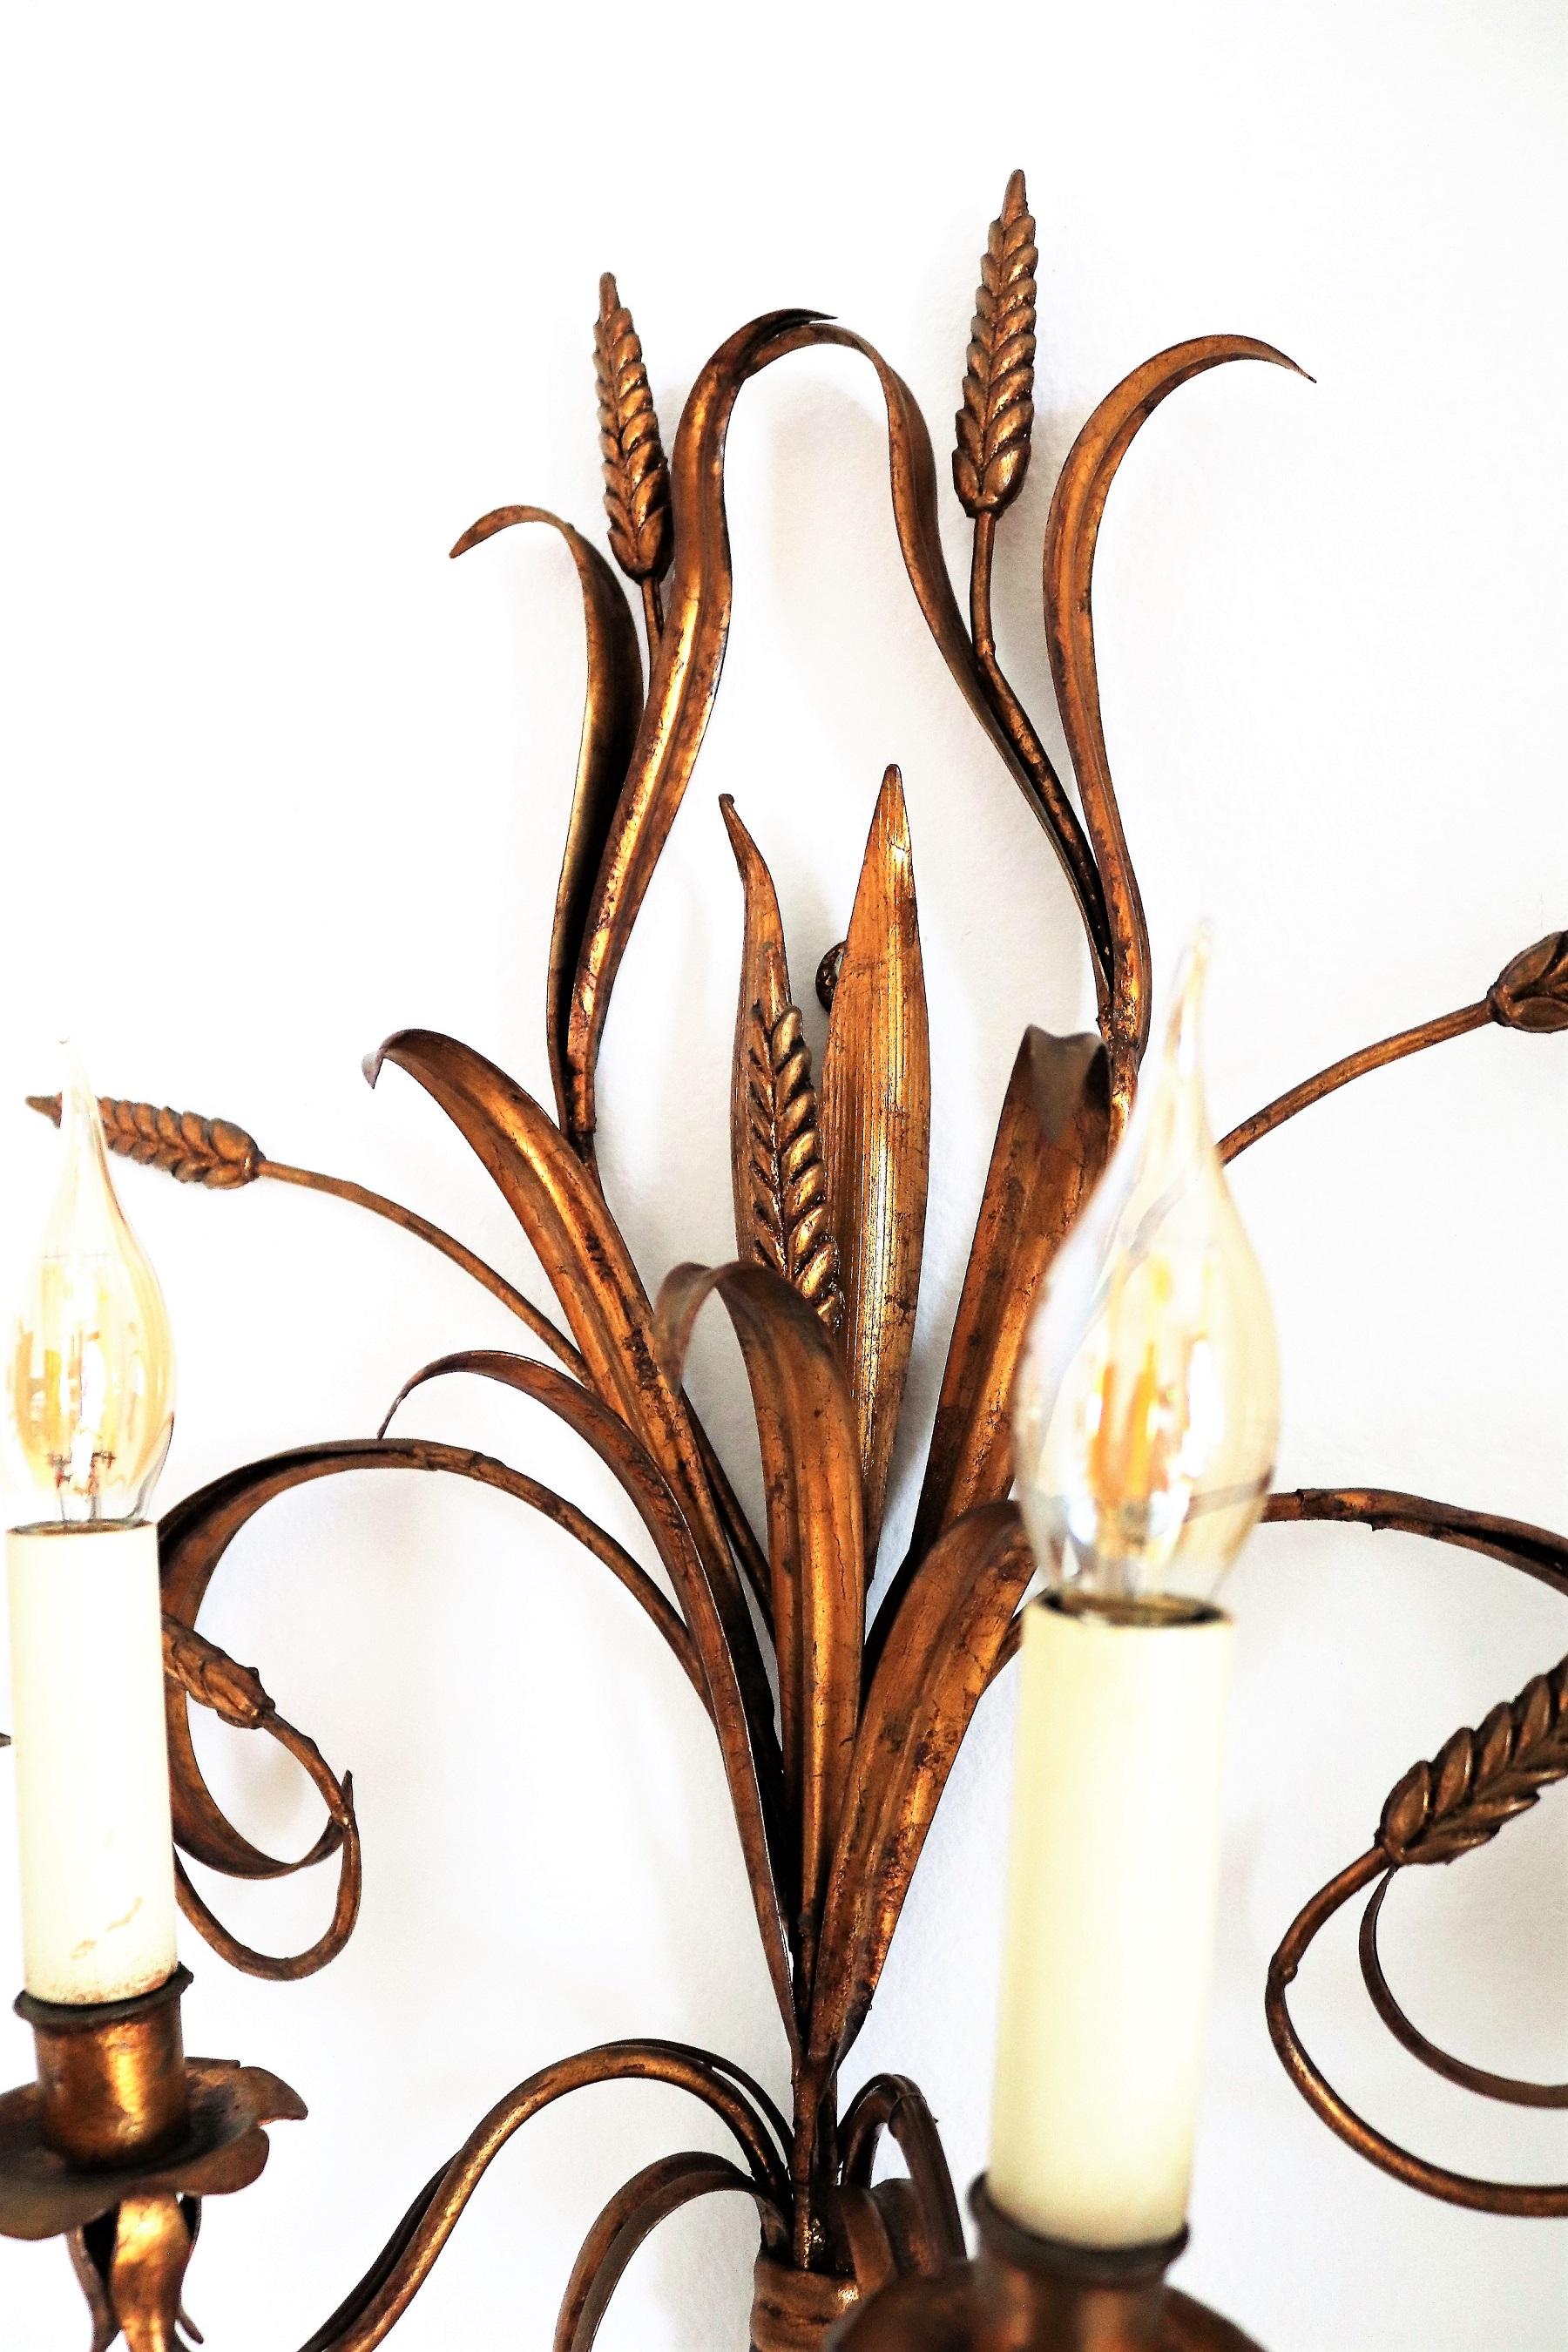 Italian Midcentury Gilt Tole Wall Sconces with Wheat Sheaf, 1950s, Set of Five For Sale 1